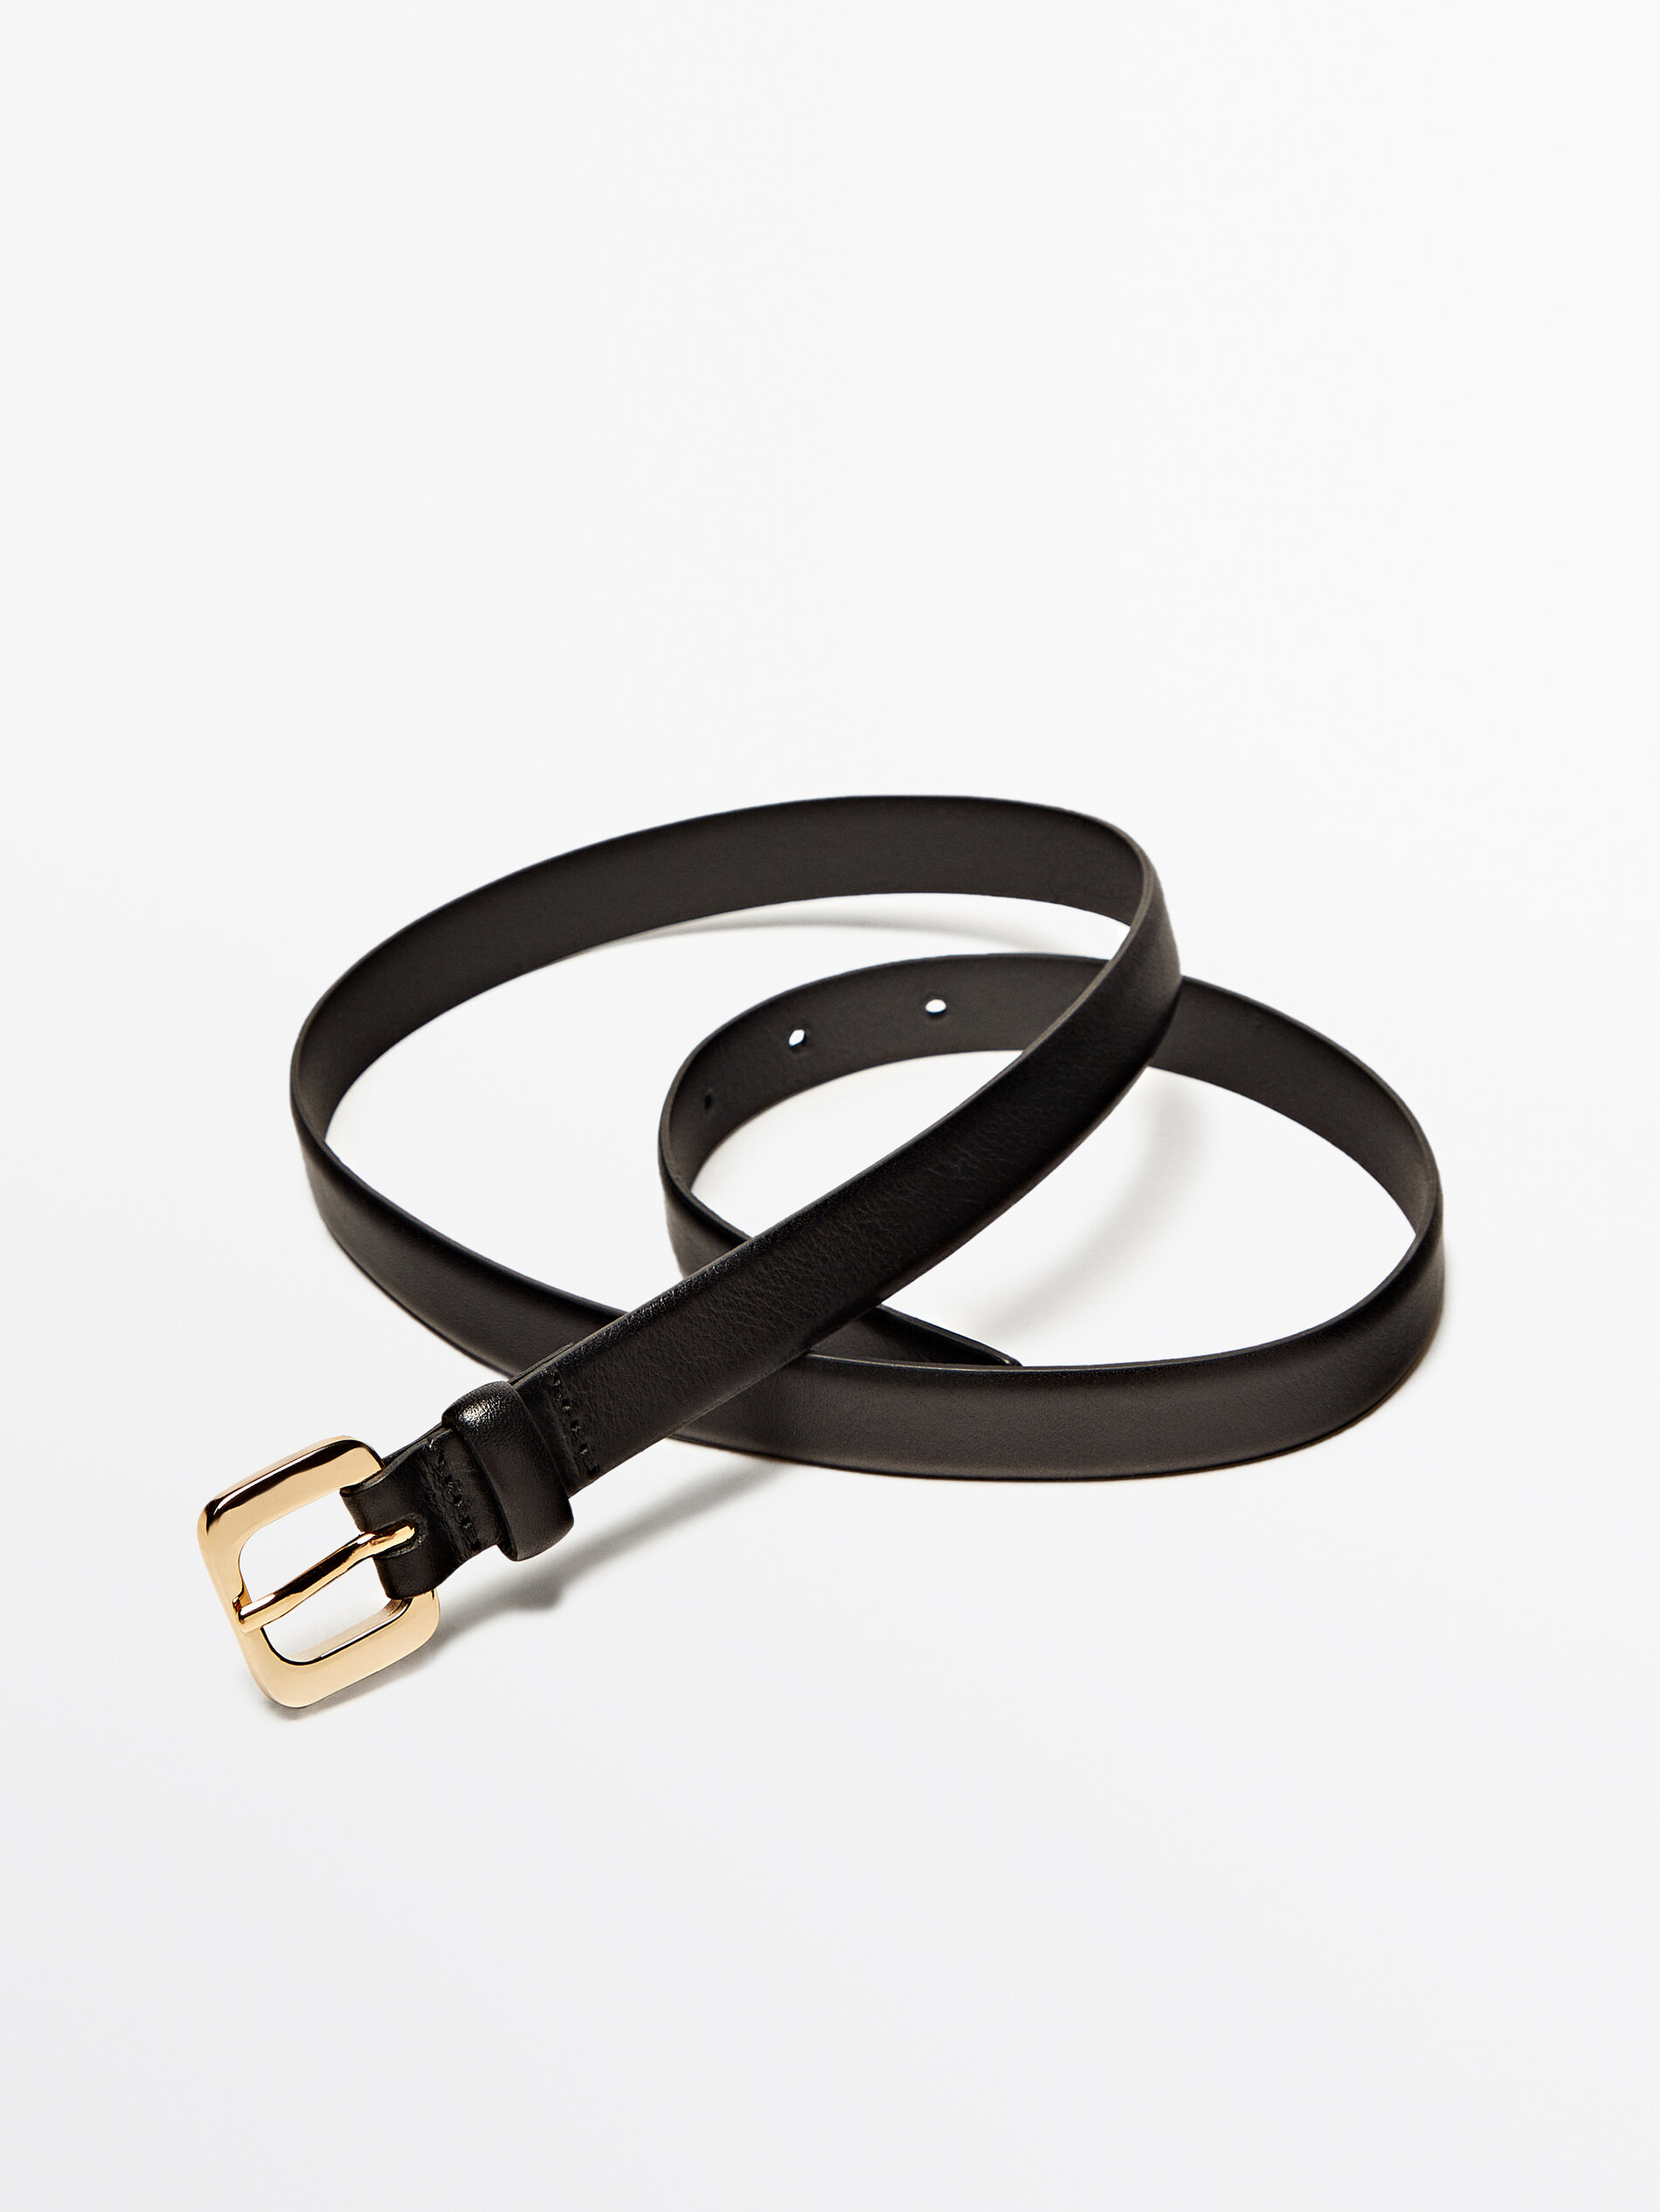 Thin leather belt with round buckle